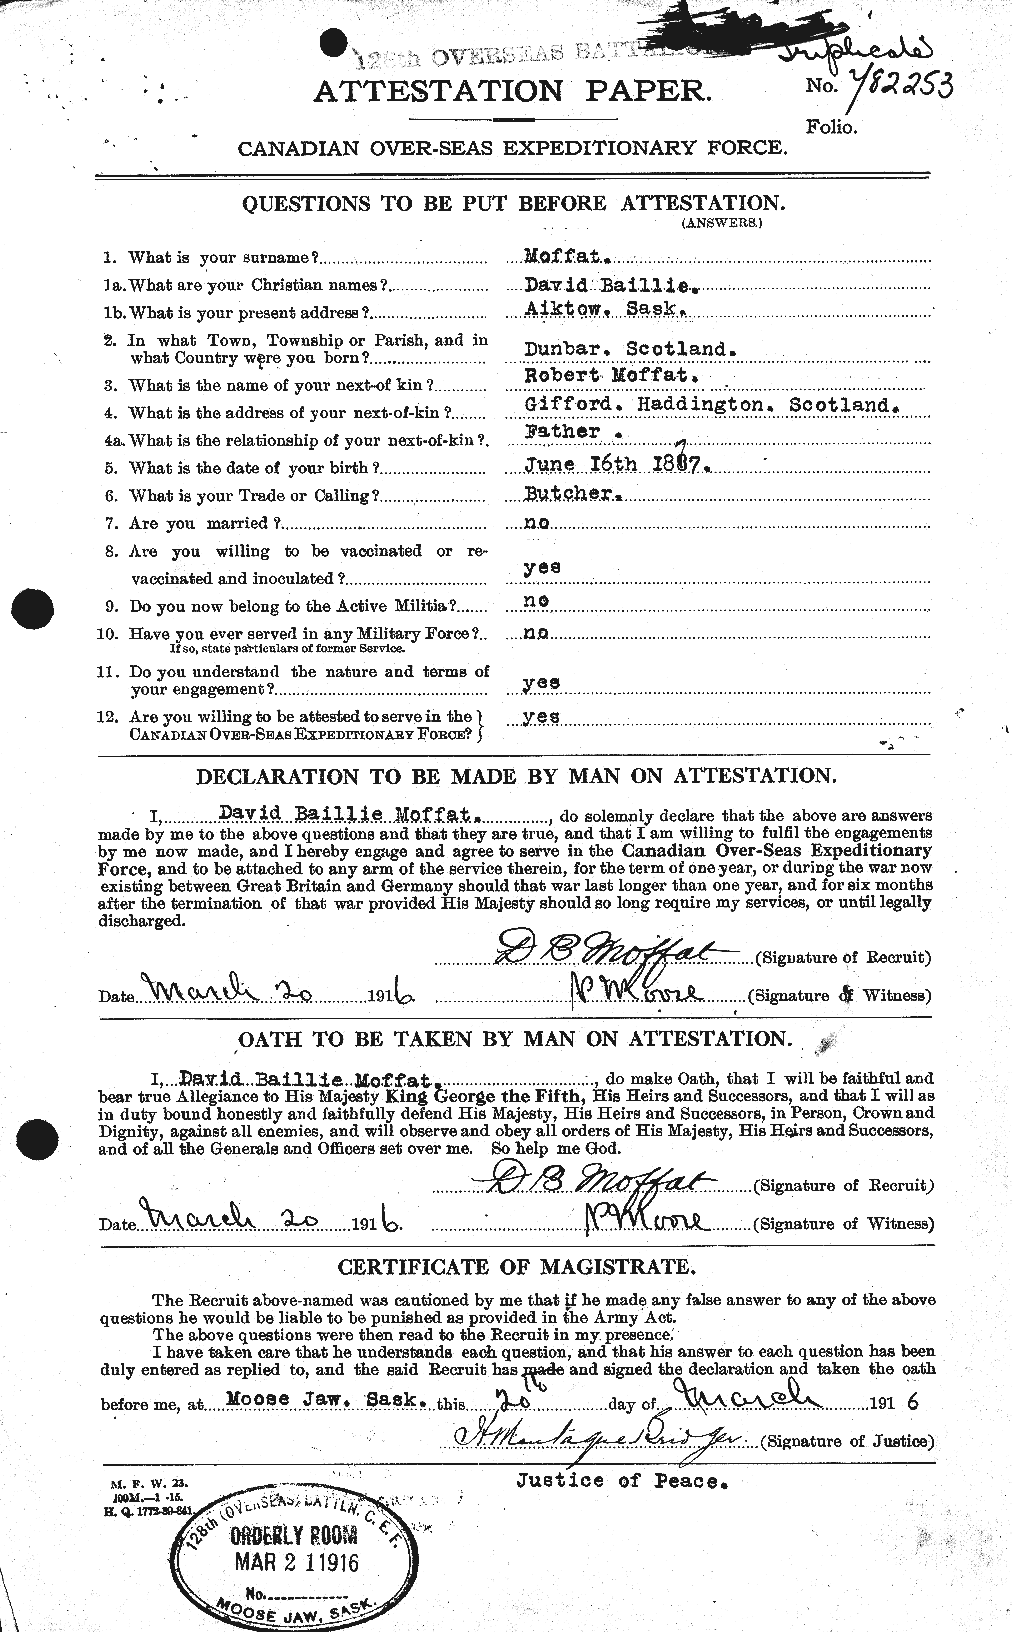 Personnel Records of the First World War - CEF 499003a